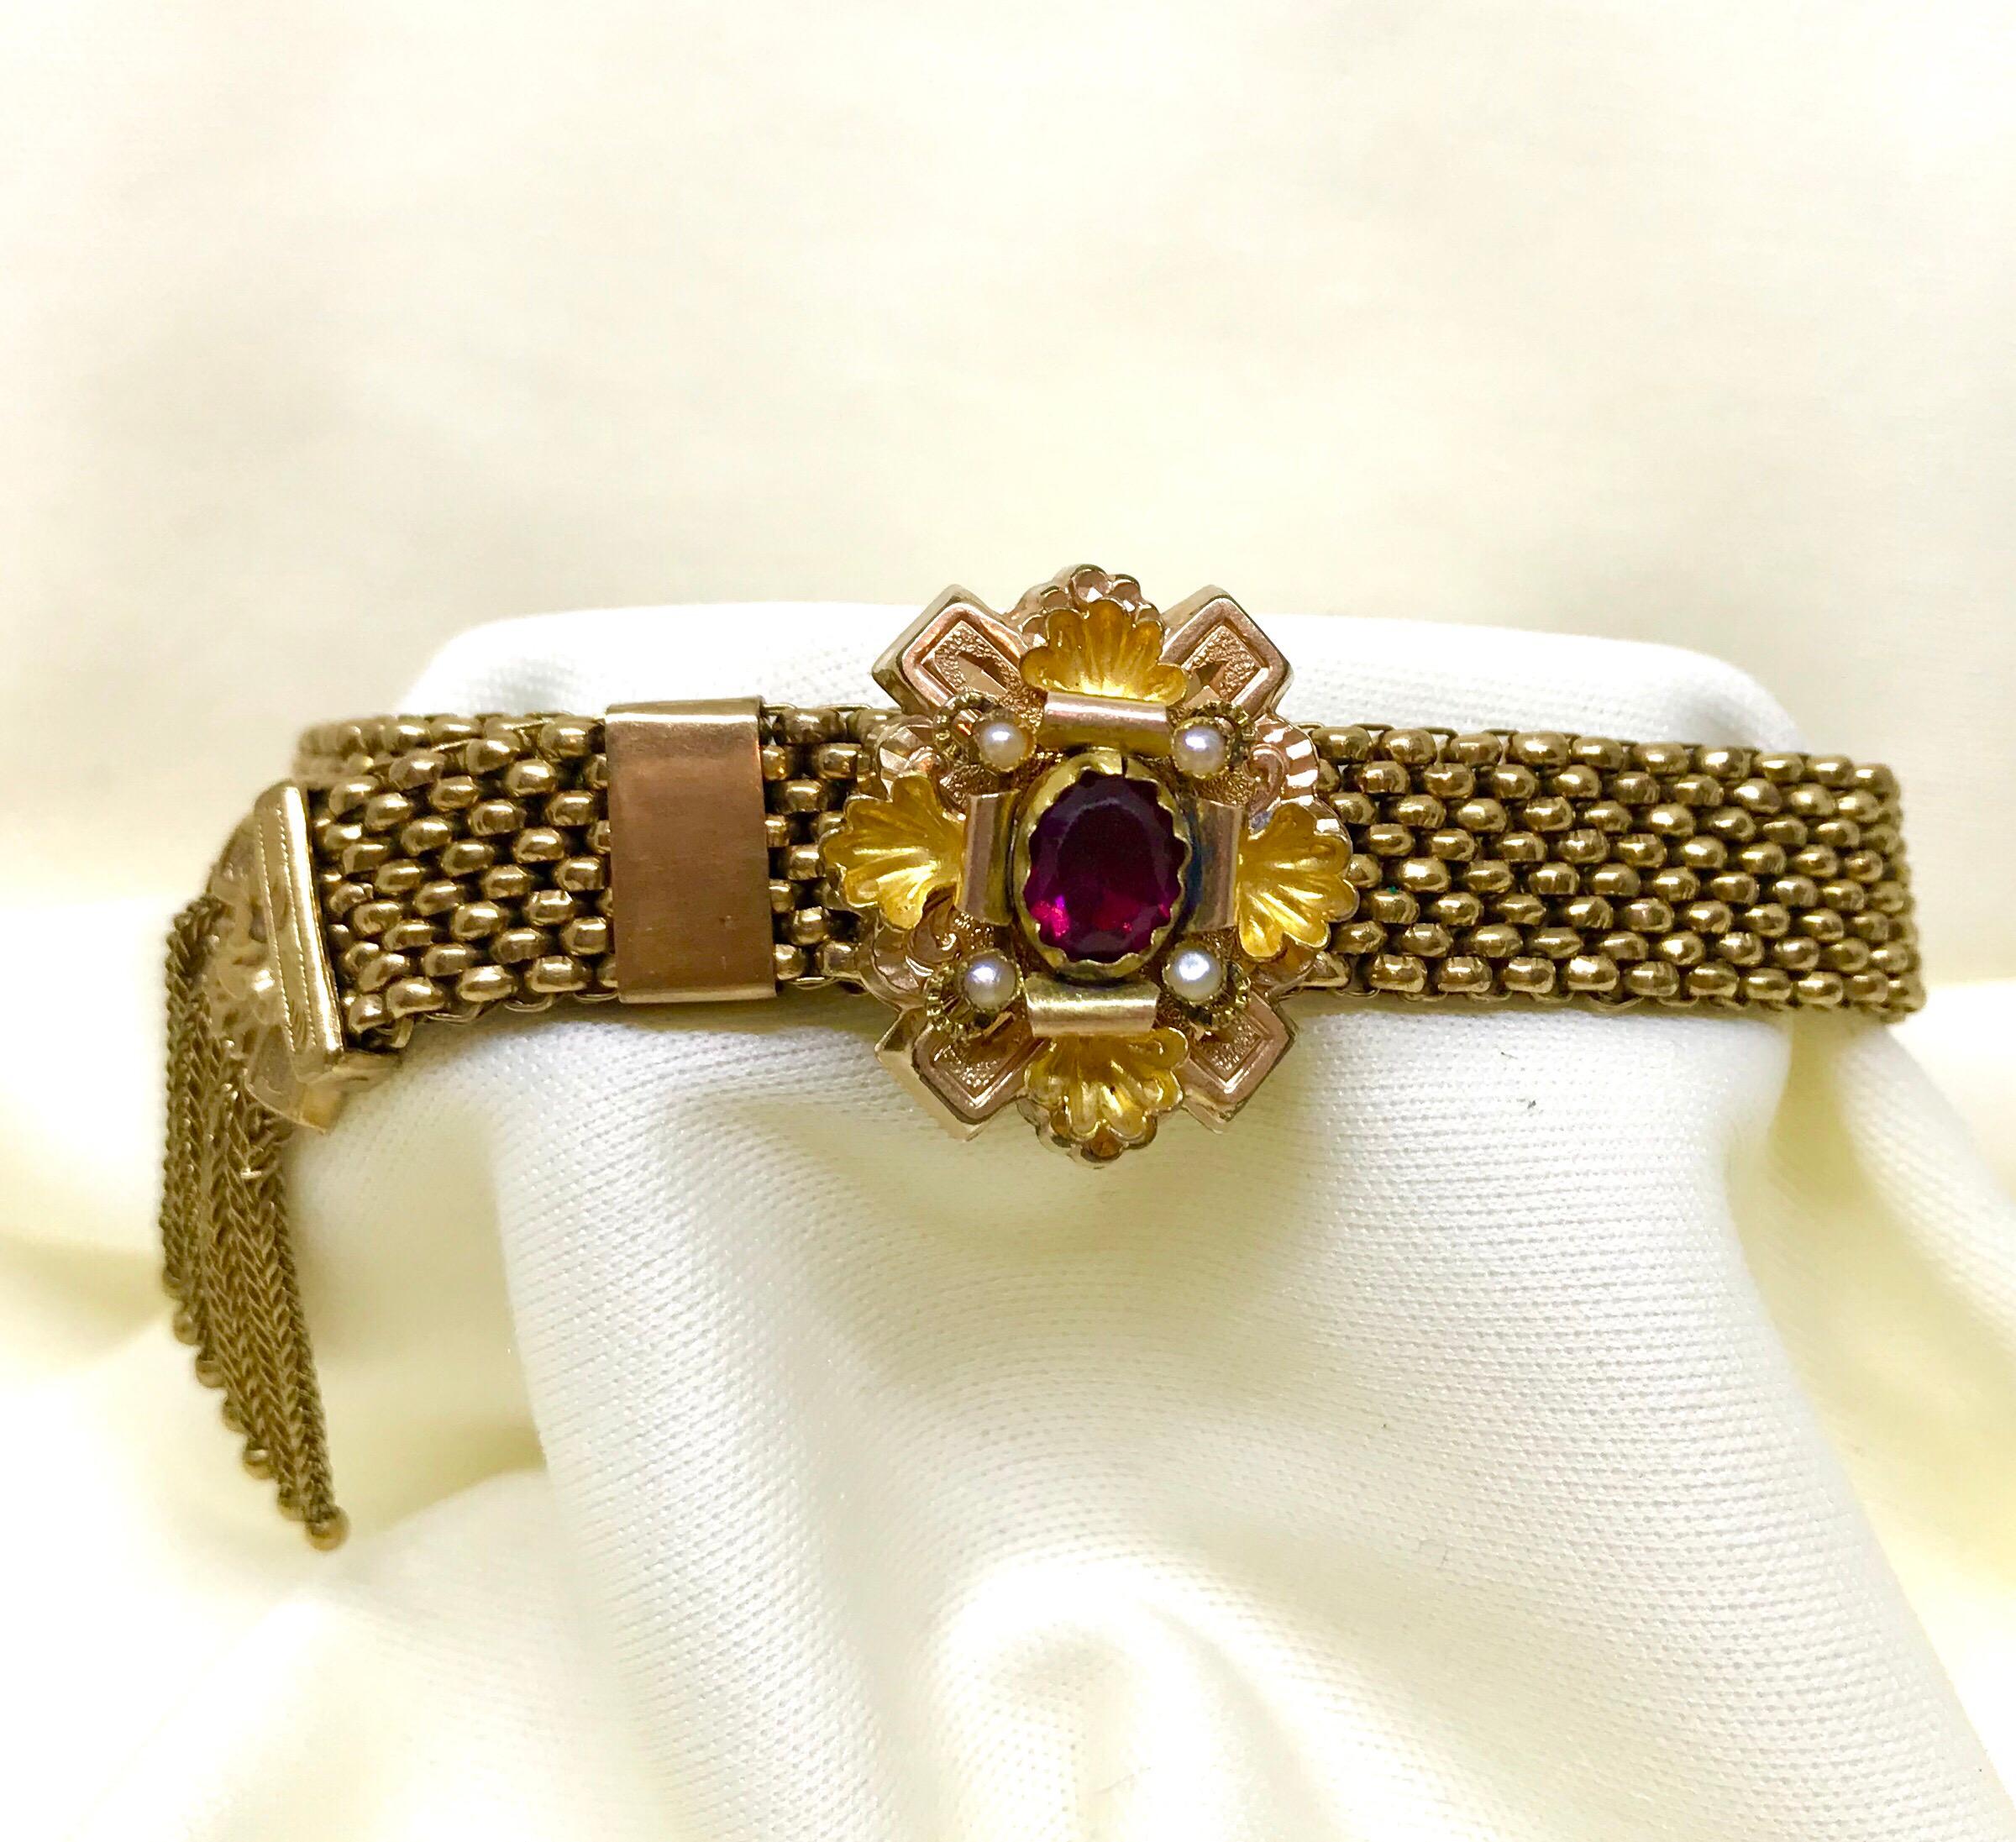 Antique Victorian garnet and pearl gold filled mesh bracelet with a foxtail chain tassel.  The ornately designed top piece is bezel set with an oval faceted garnet and embellished with four small pearls.  When the slide is opened all the way the